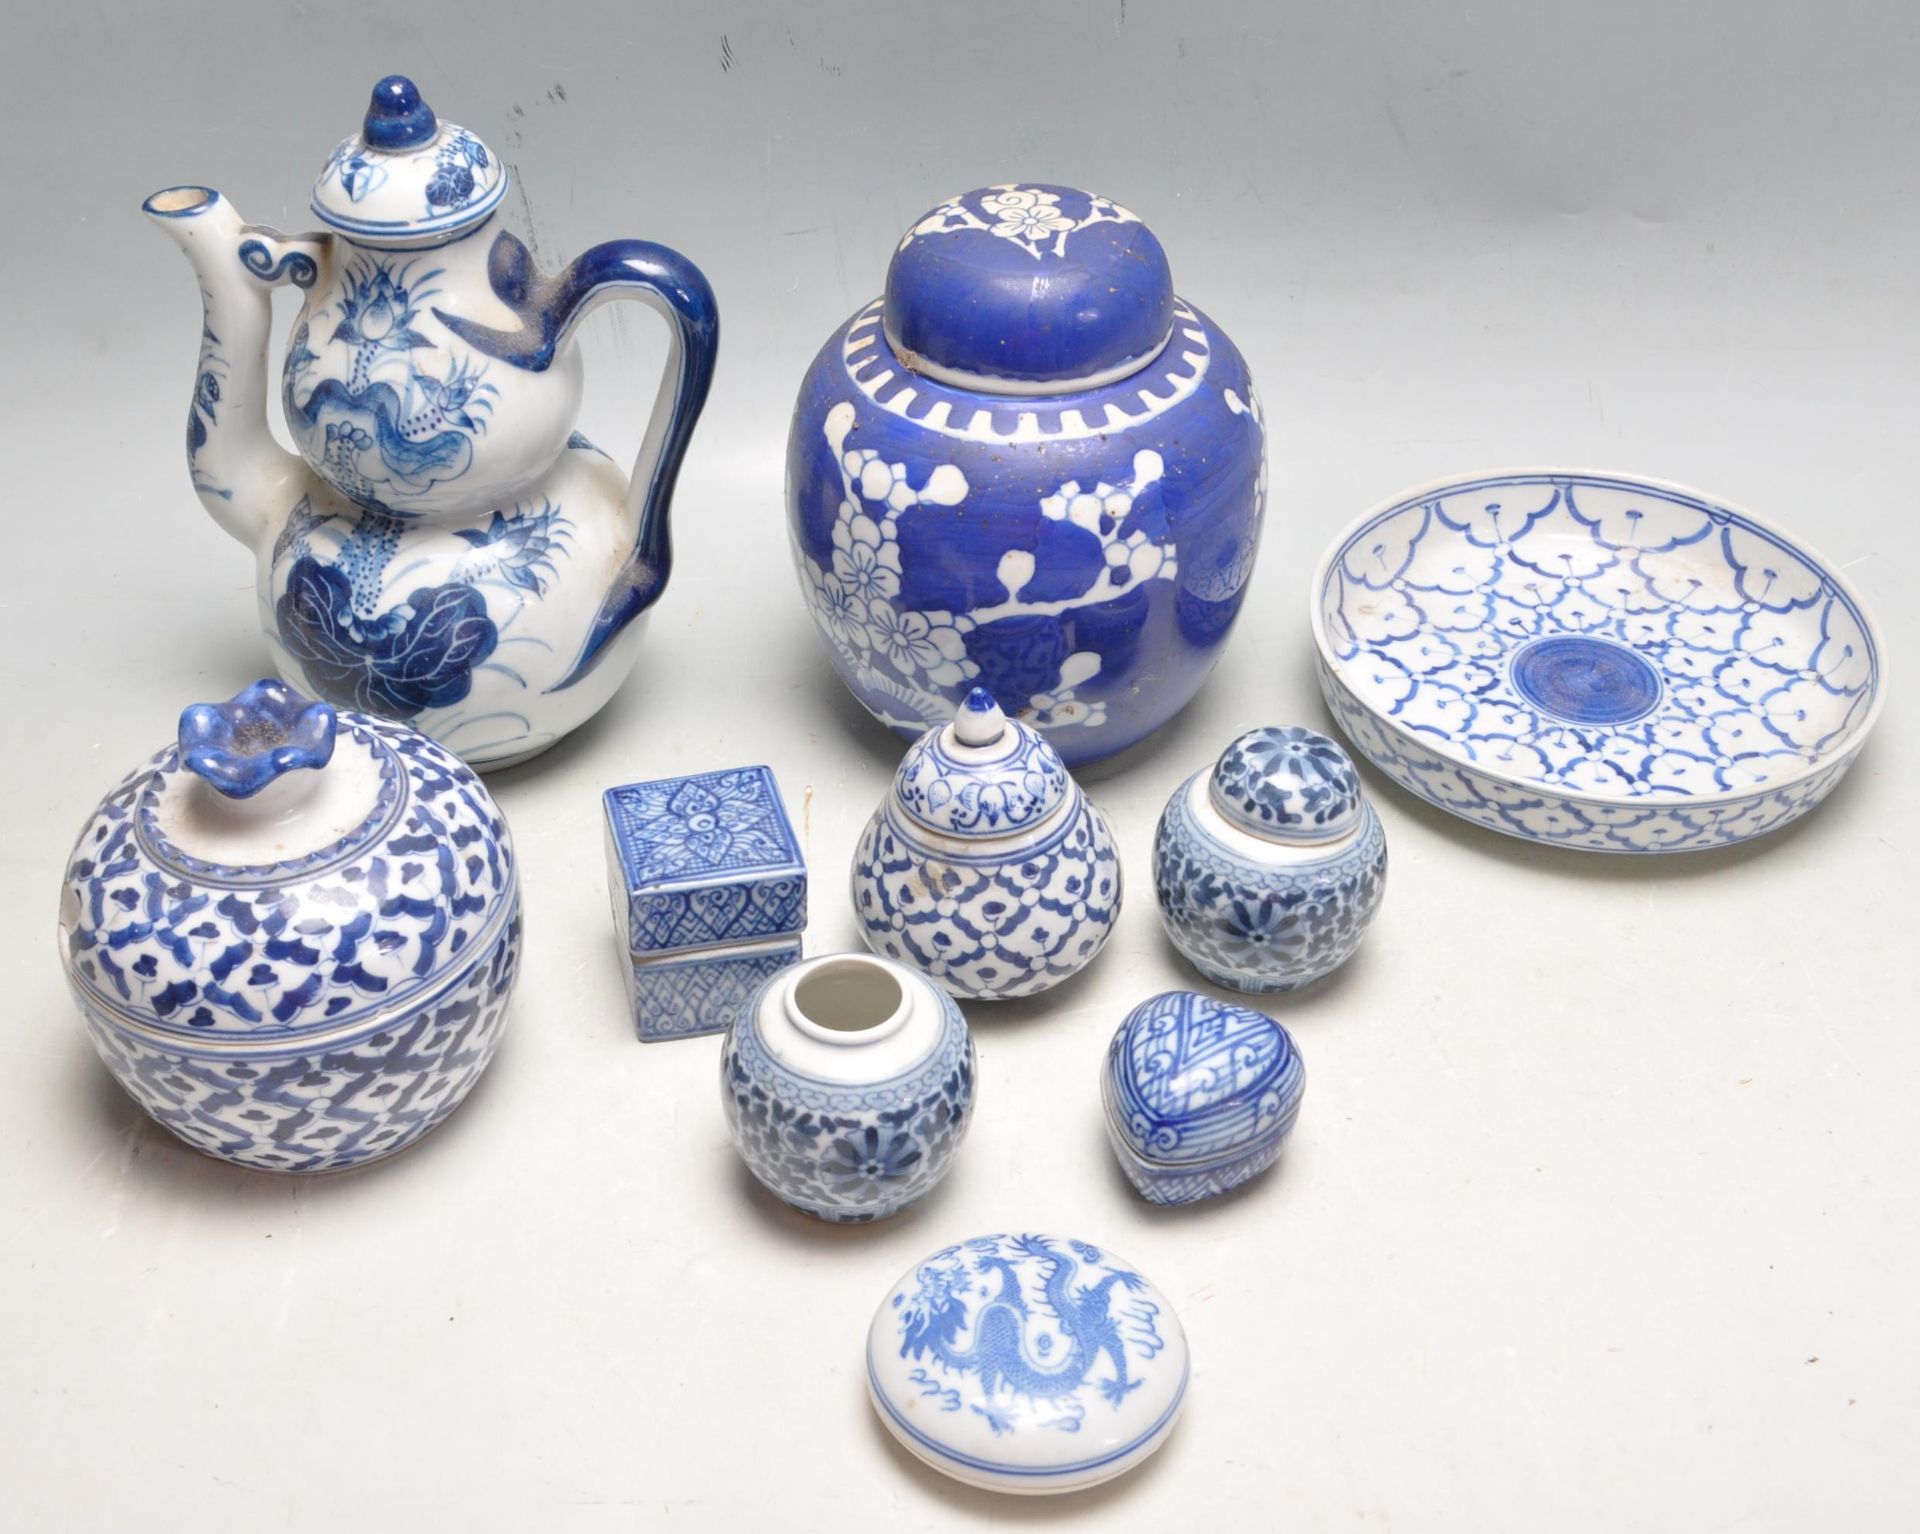 COLLECTION OF ANTIQUE CHINESE BLUE AND WHITE CERAMICS